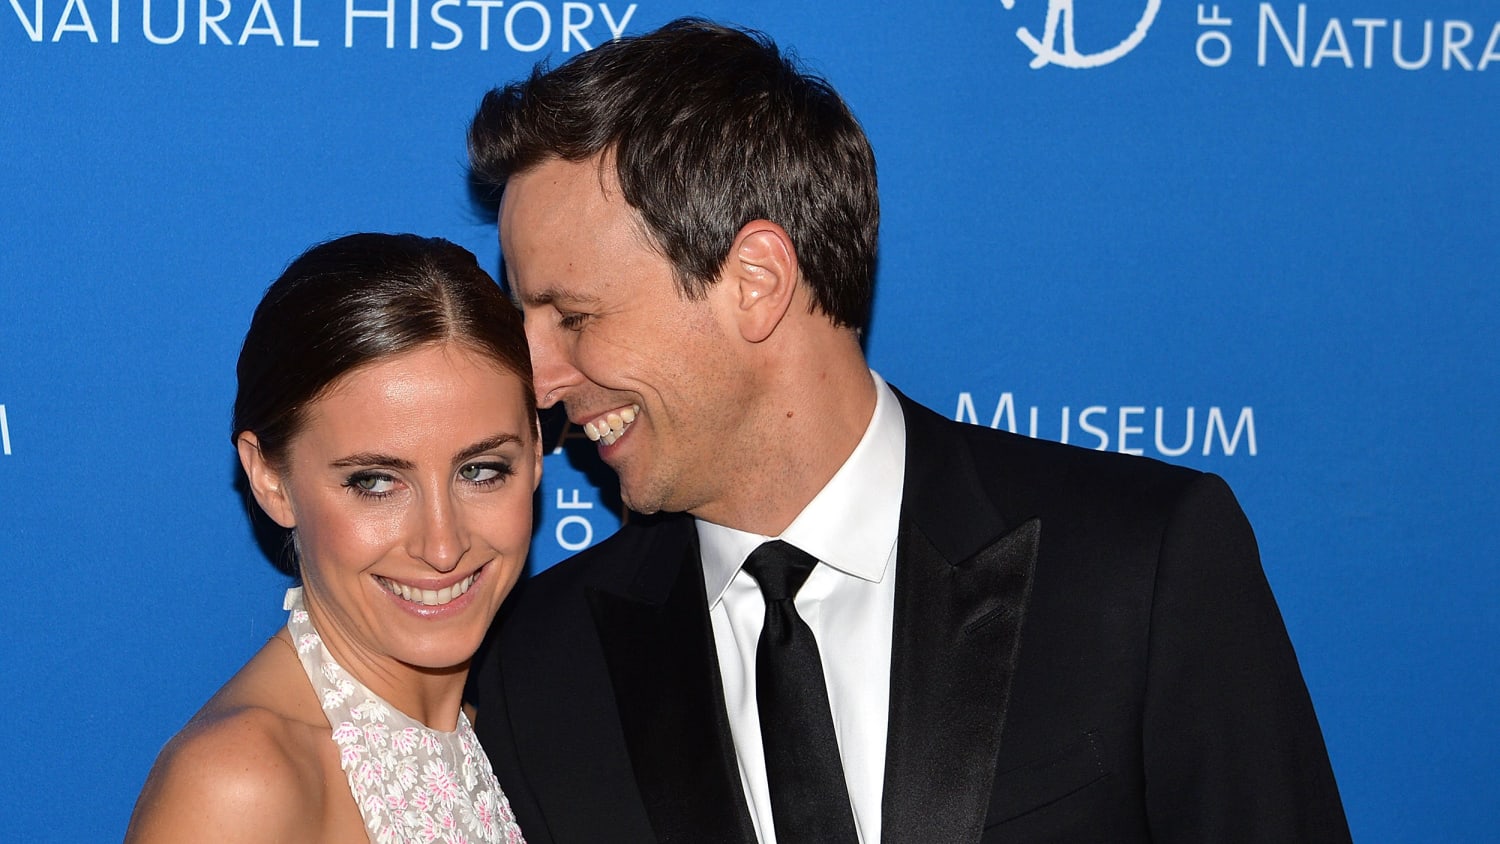 Seth Meyers and wife Alexi Meyers welcome first child, a baby boy - TODAY.com